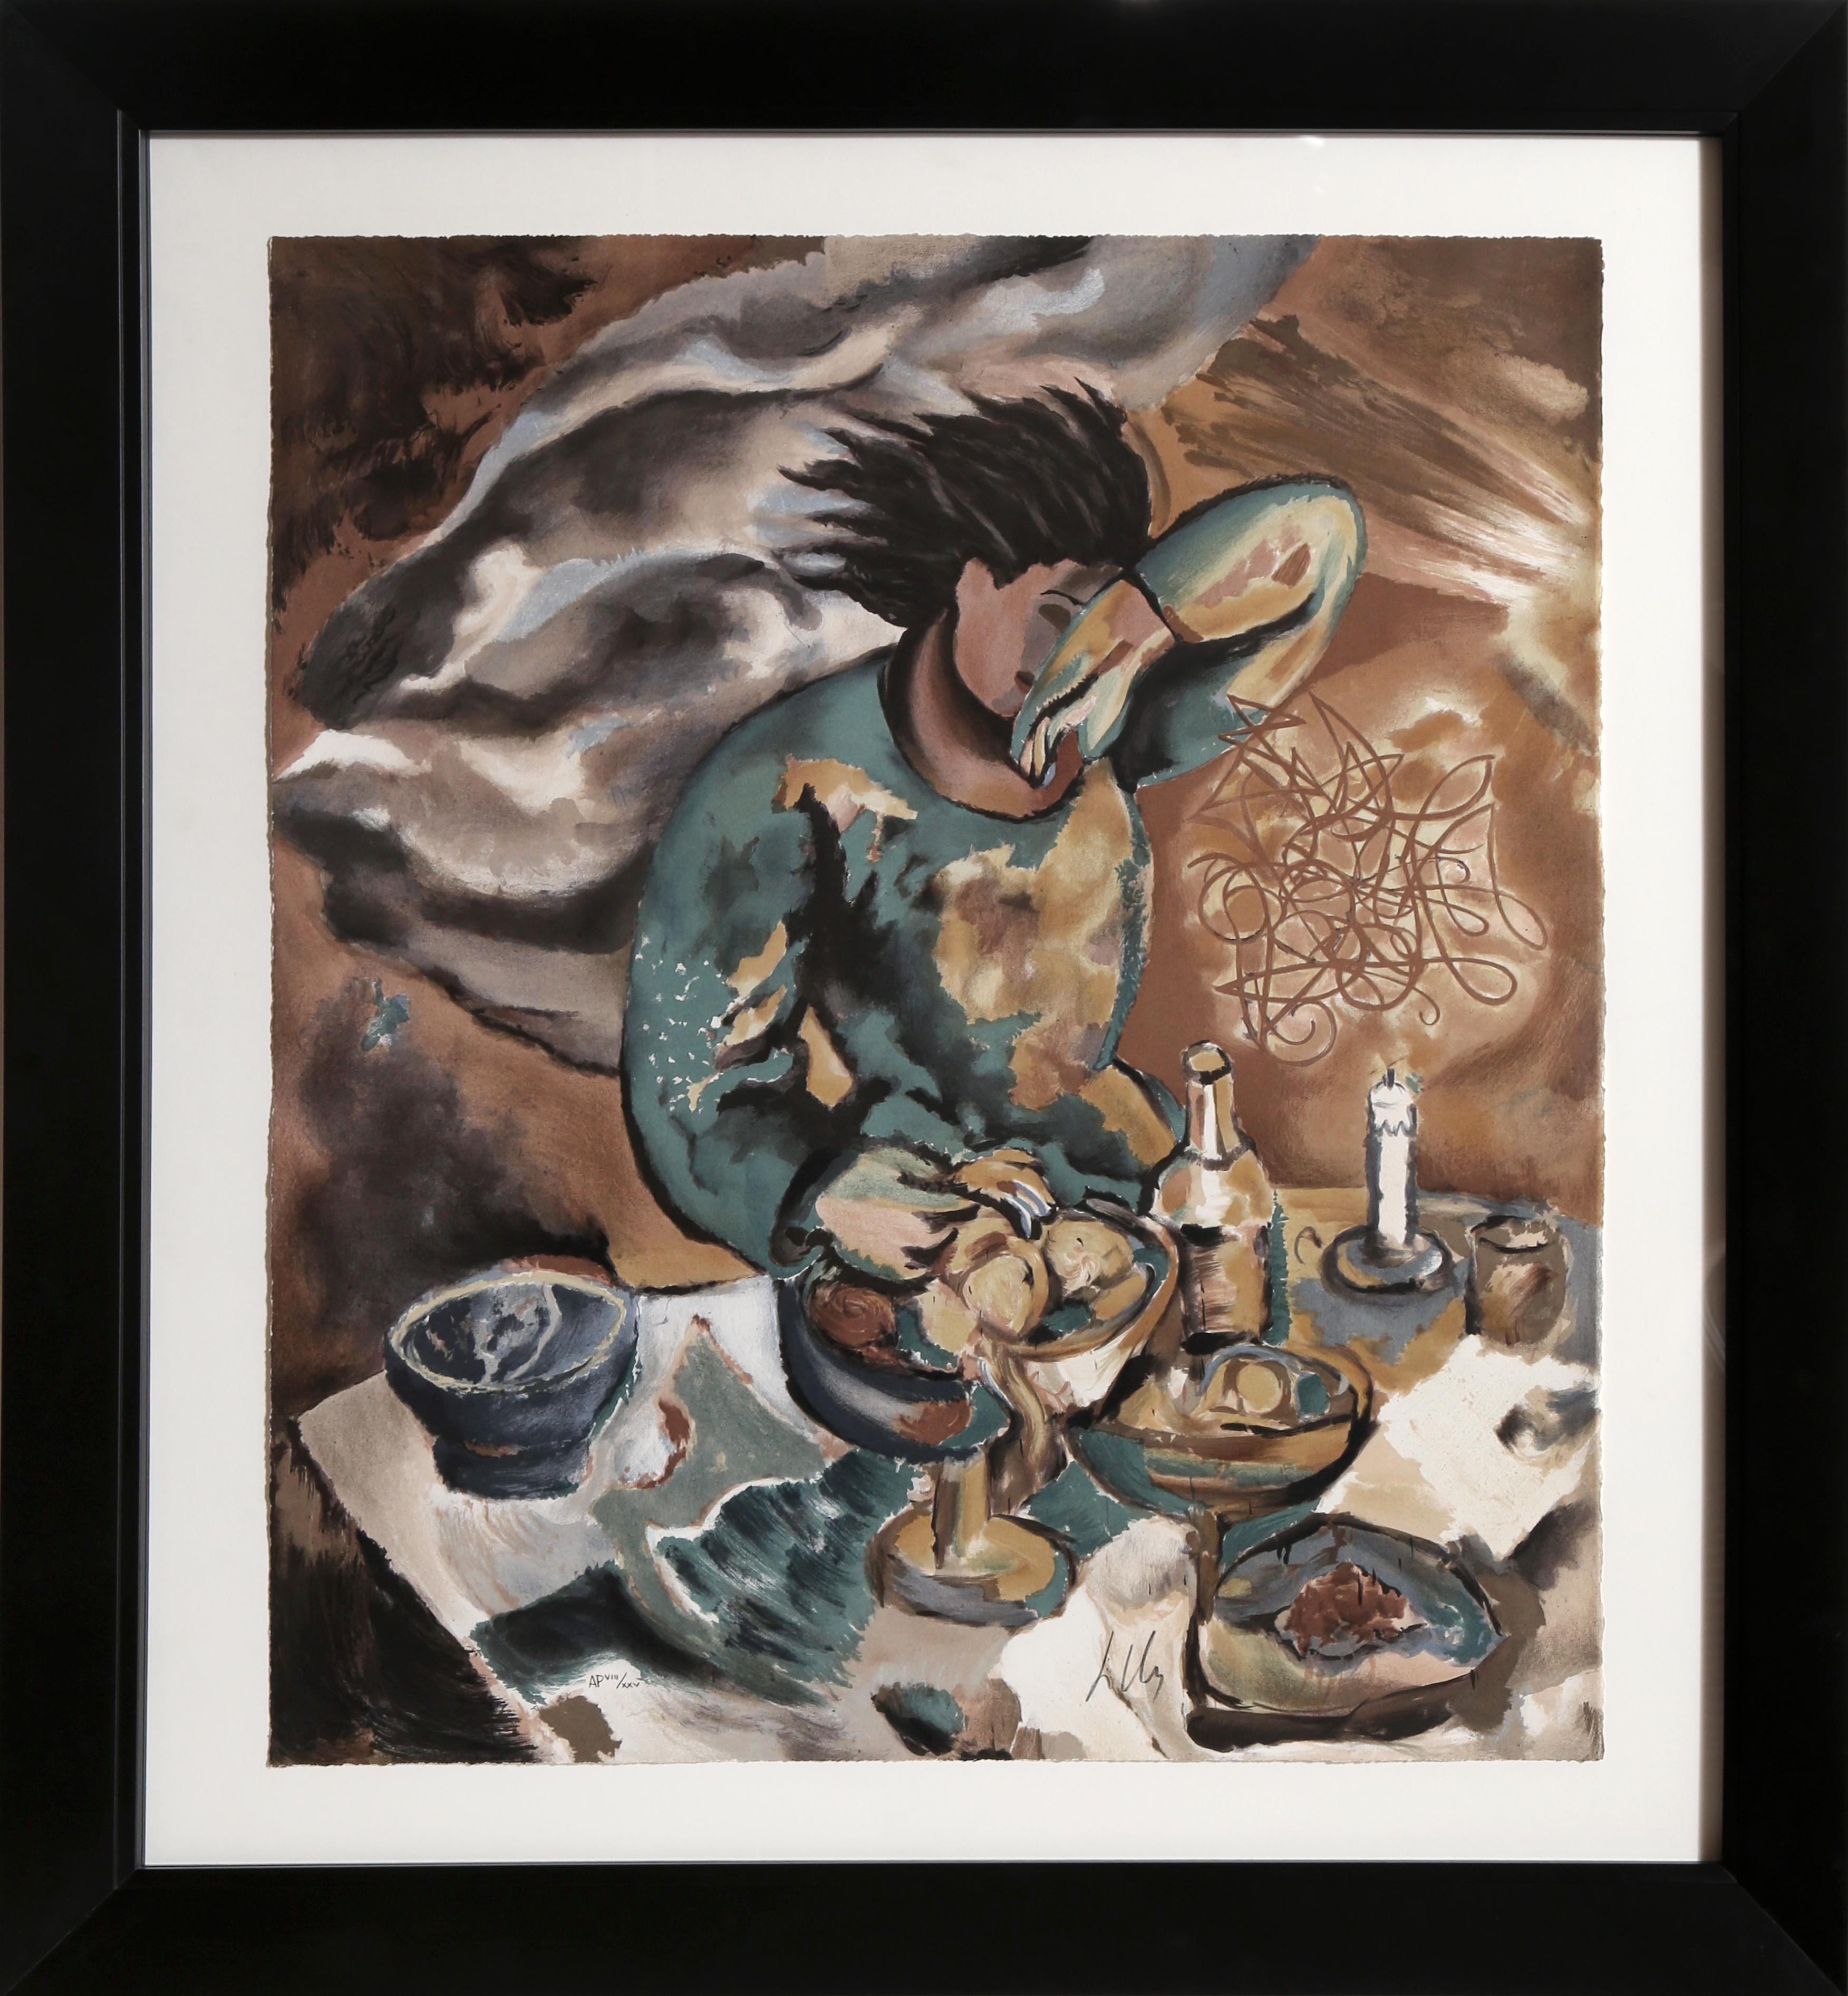 Dinner Table, Lithograph by Sandro Chia